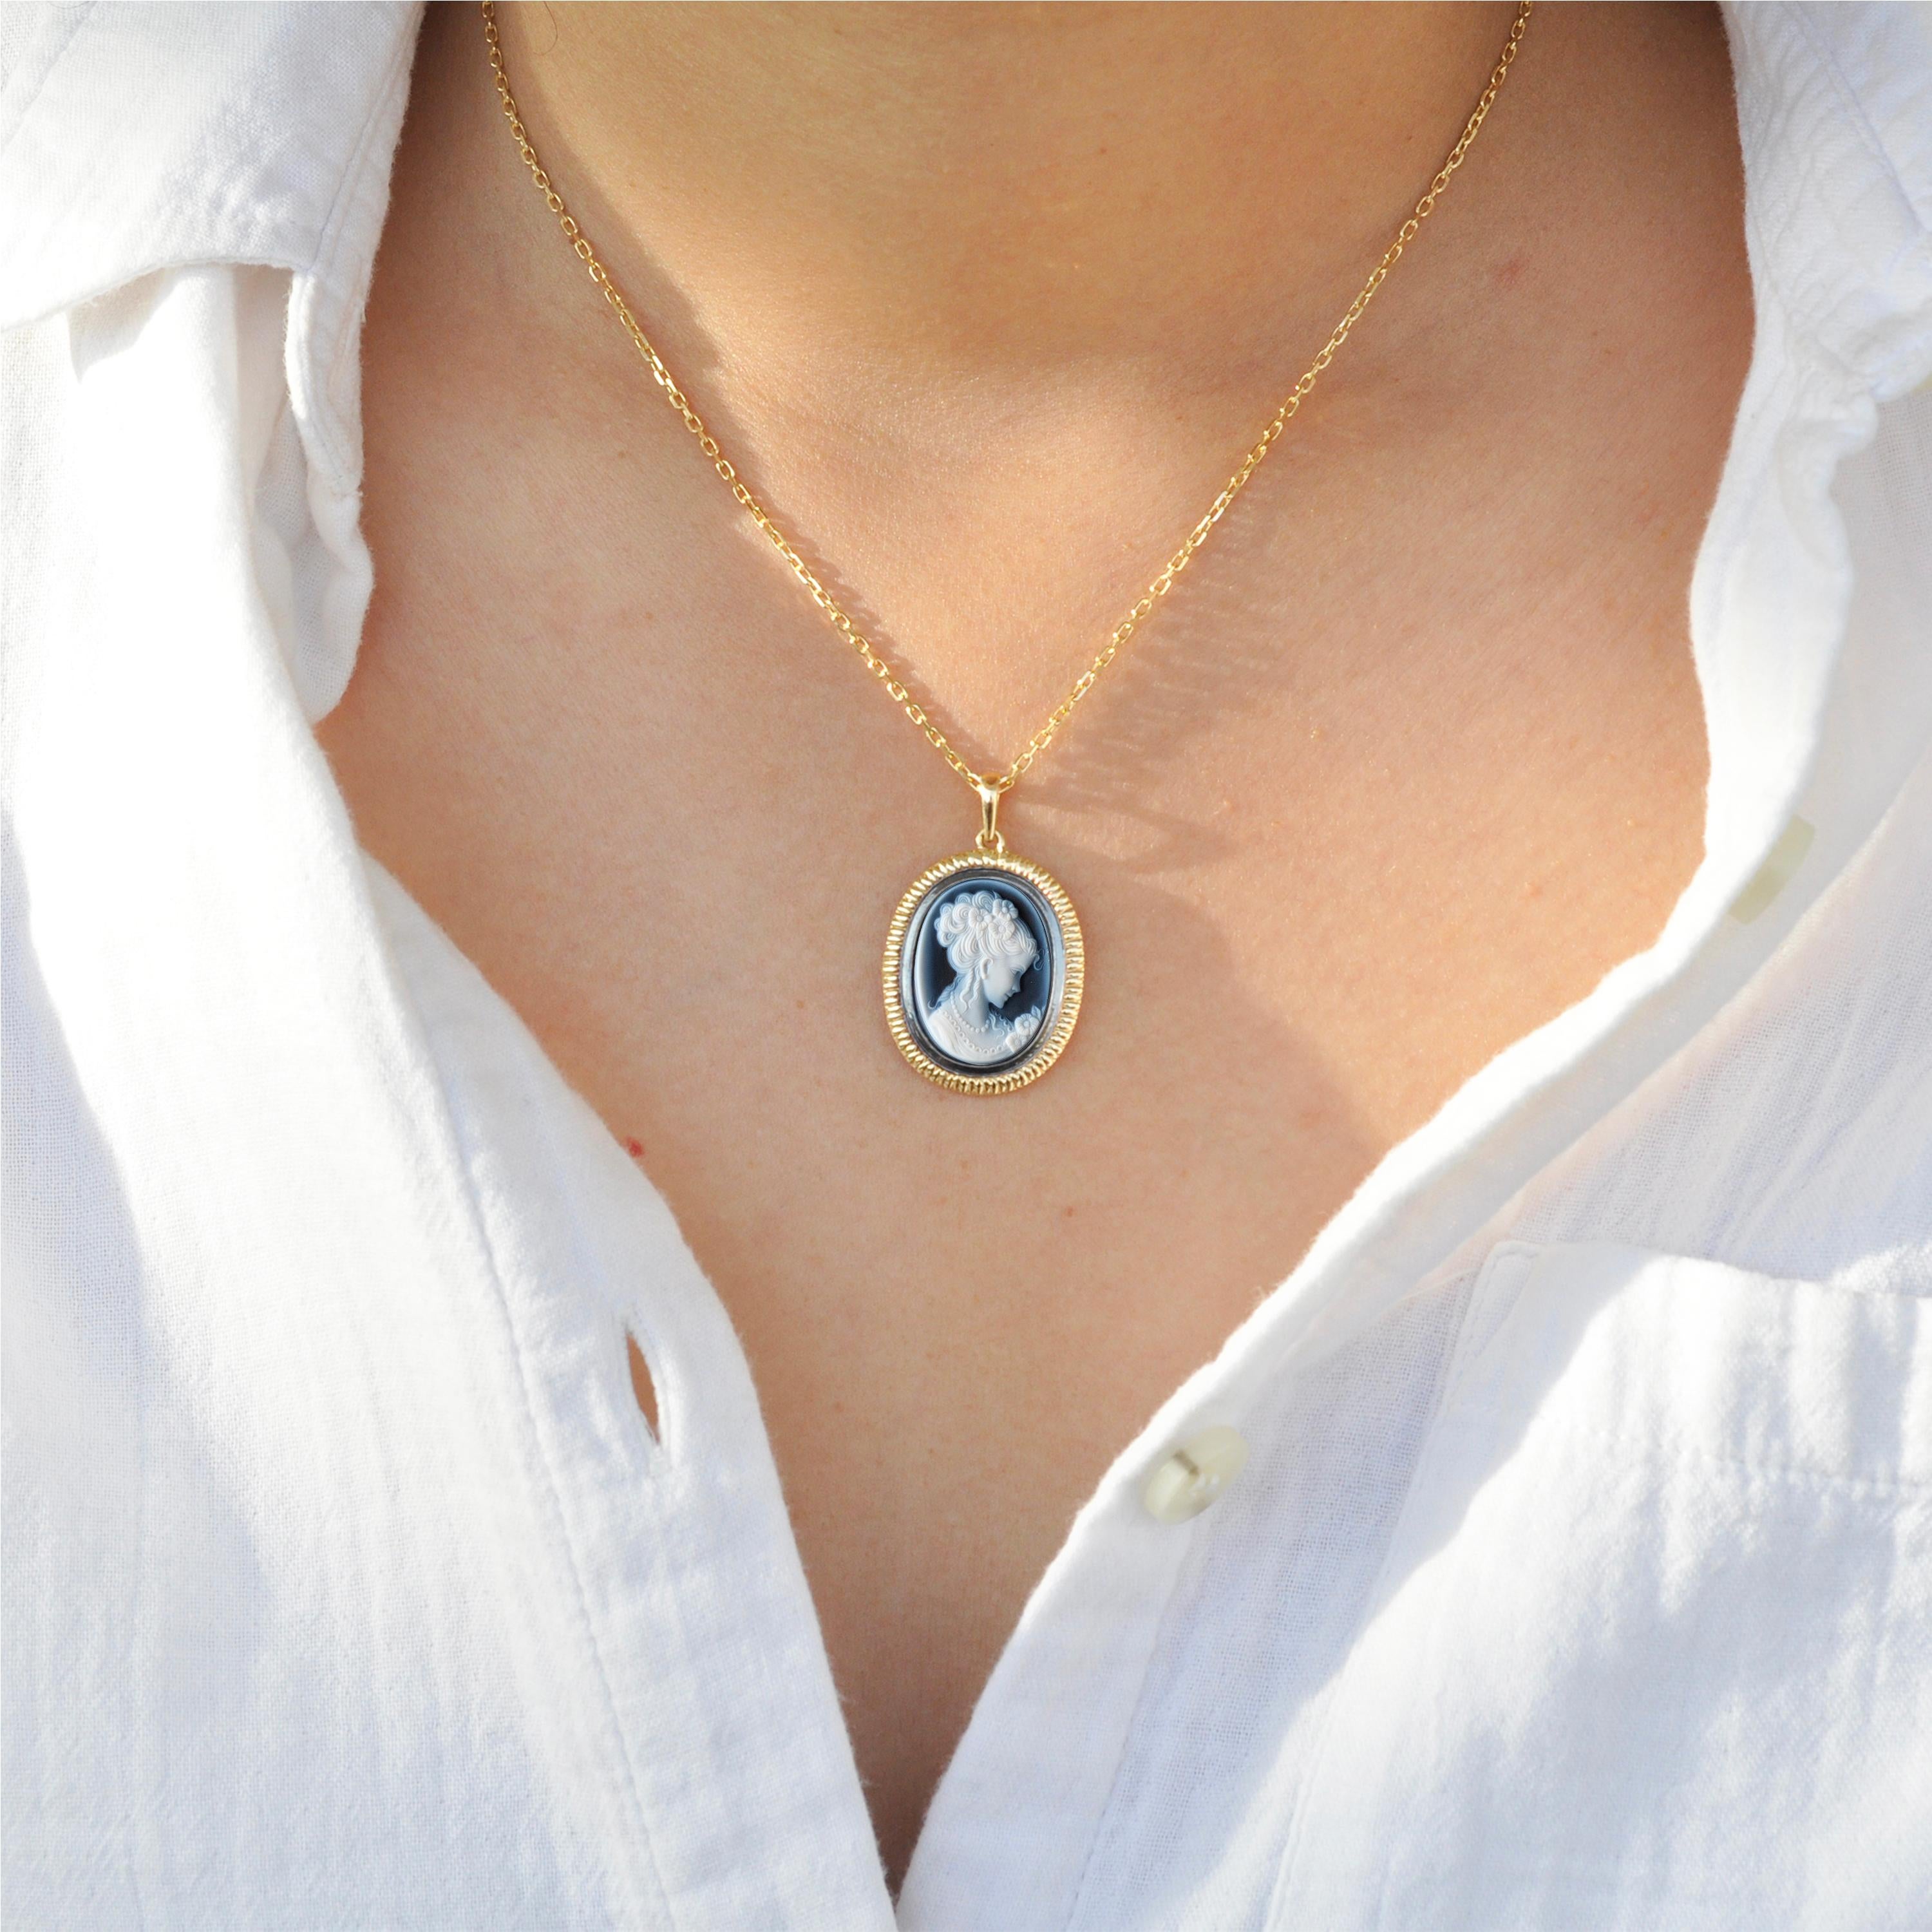 cameo necklace meaning